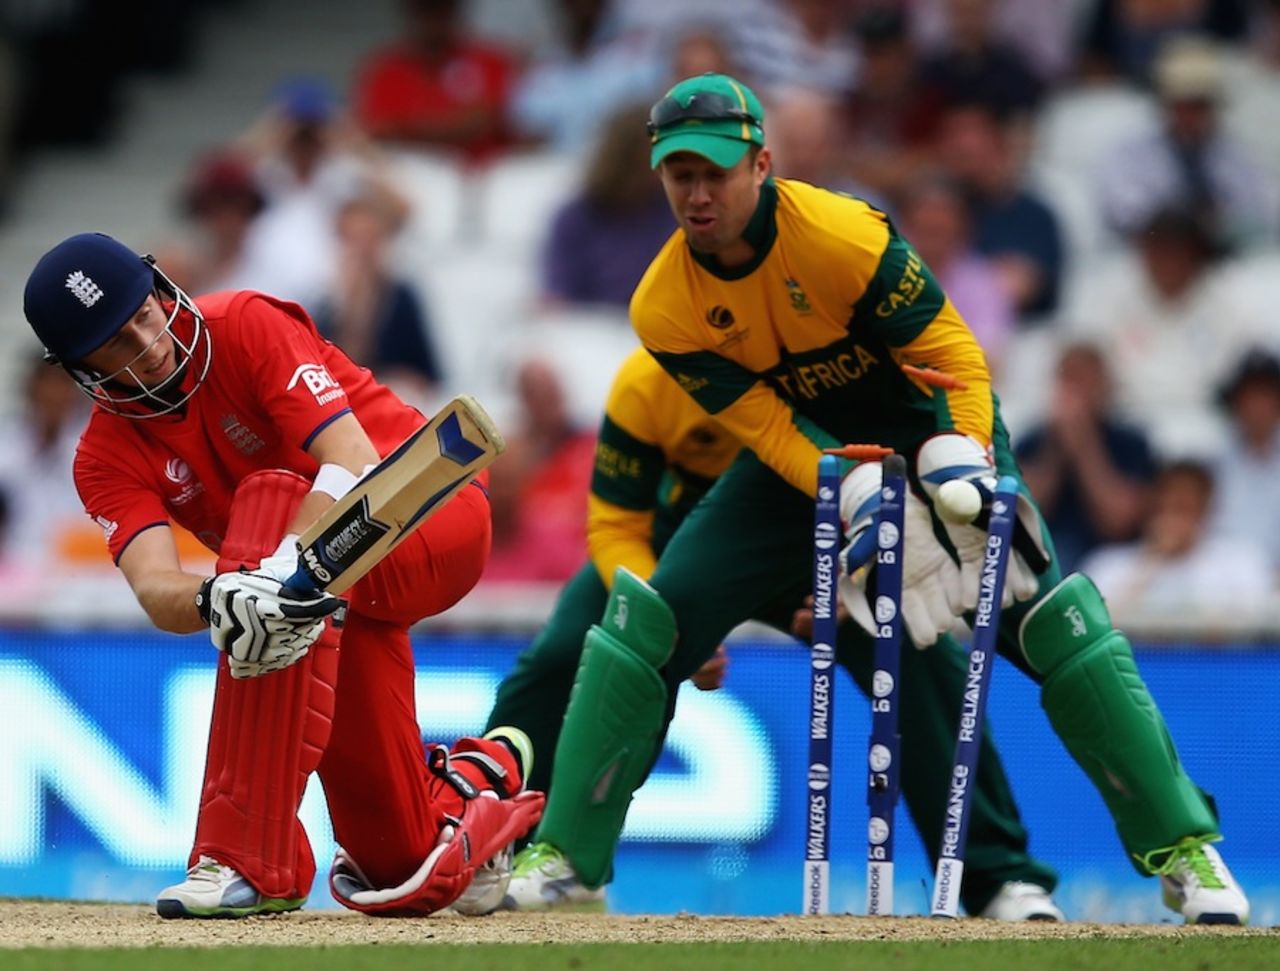 Joe Root was bowled for 48, England v South Africa, 1st semi-final, Champions Trophy, The Oval, June 19, 2013